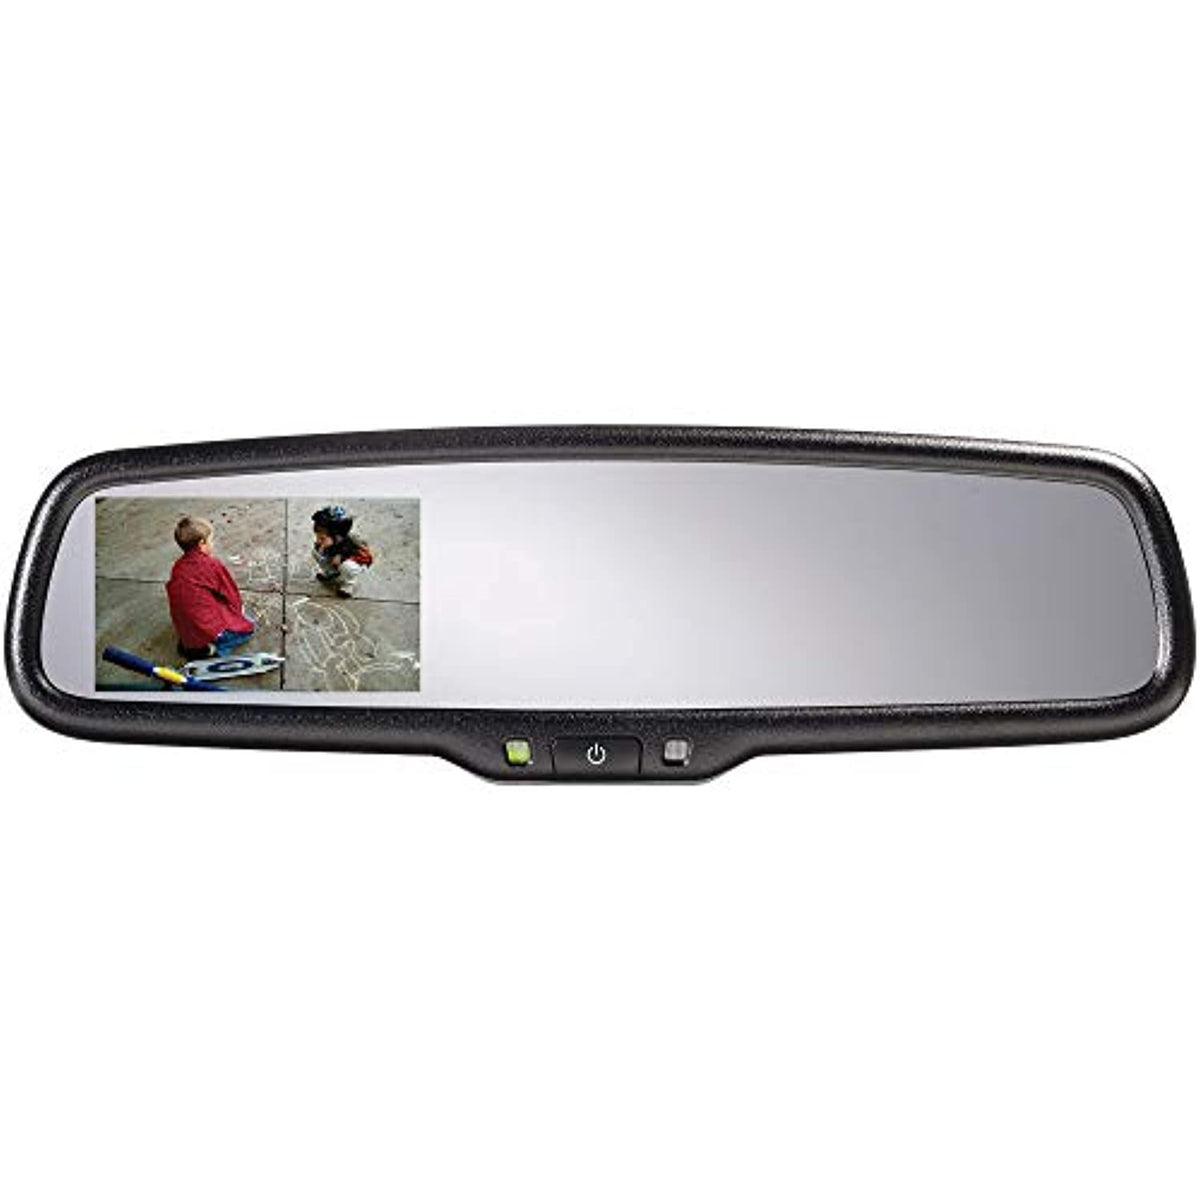 Advent ADVGENM2S Gentex Auto Dimming Rear View Mirror with 3.3" Camera Display